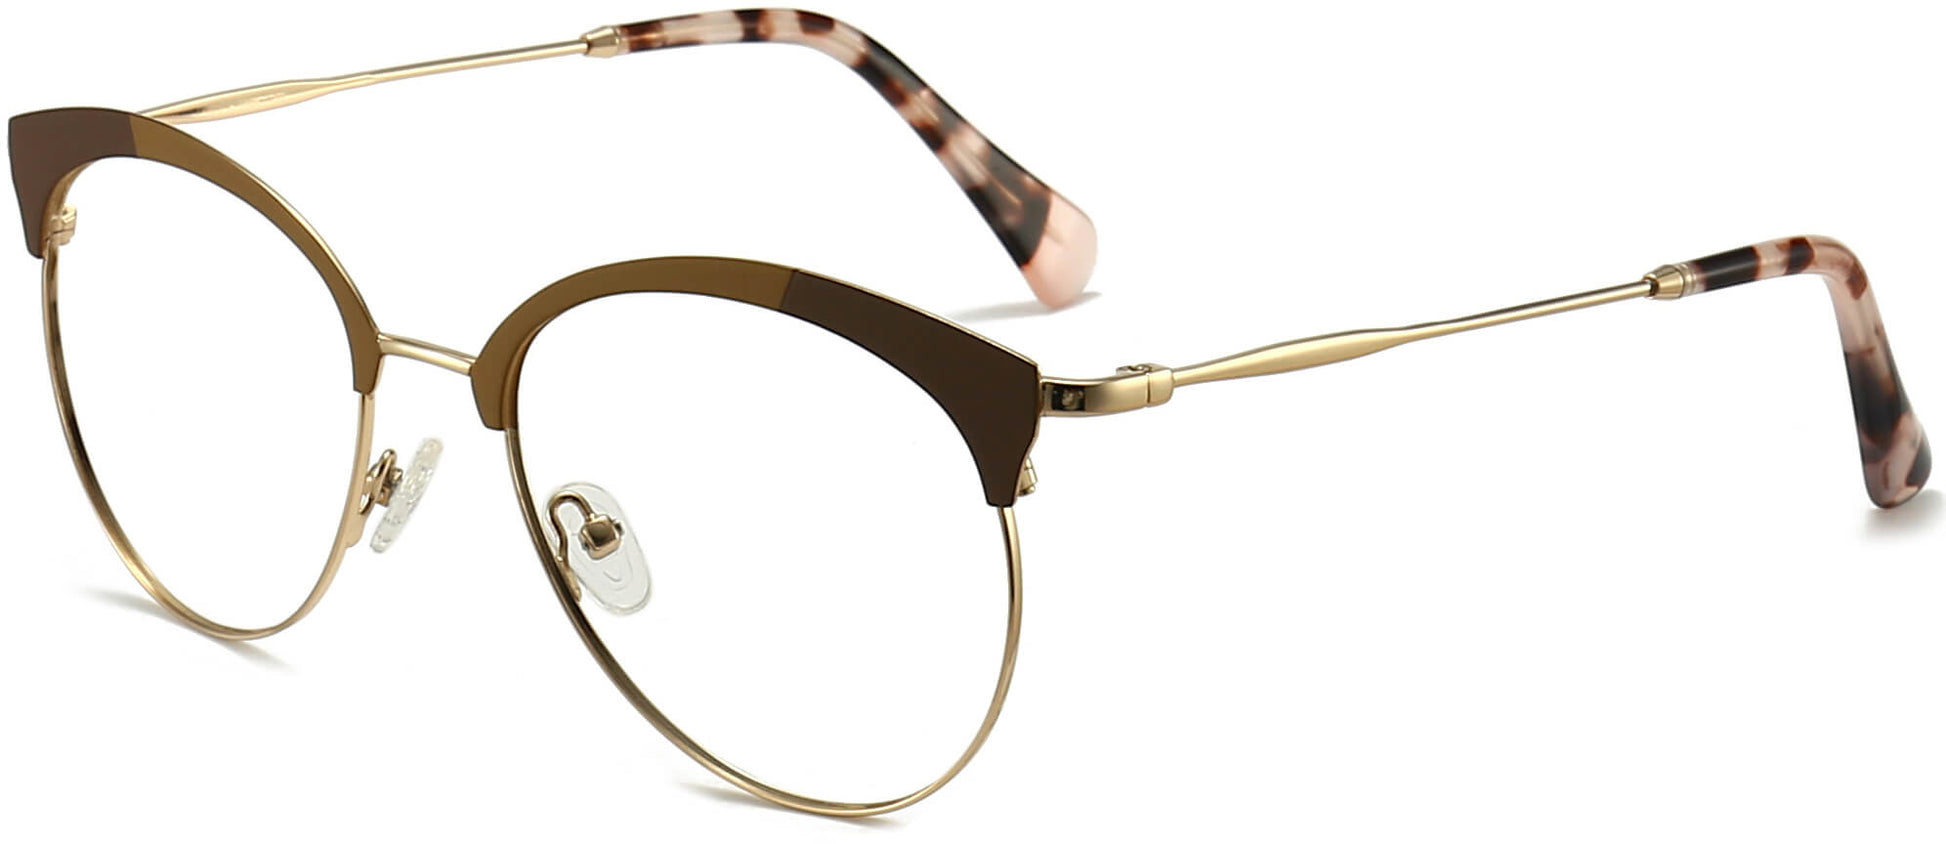 Leyla Round Brown Eyeglasses from ANRRI, angle view